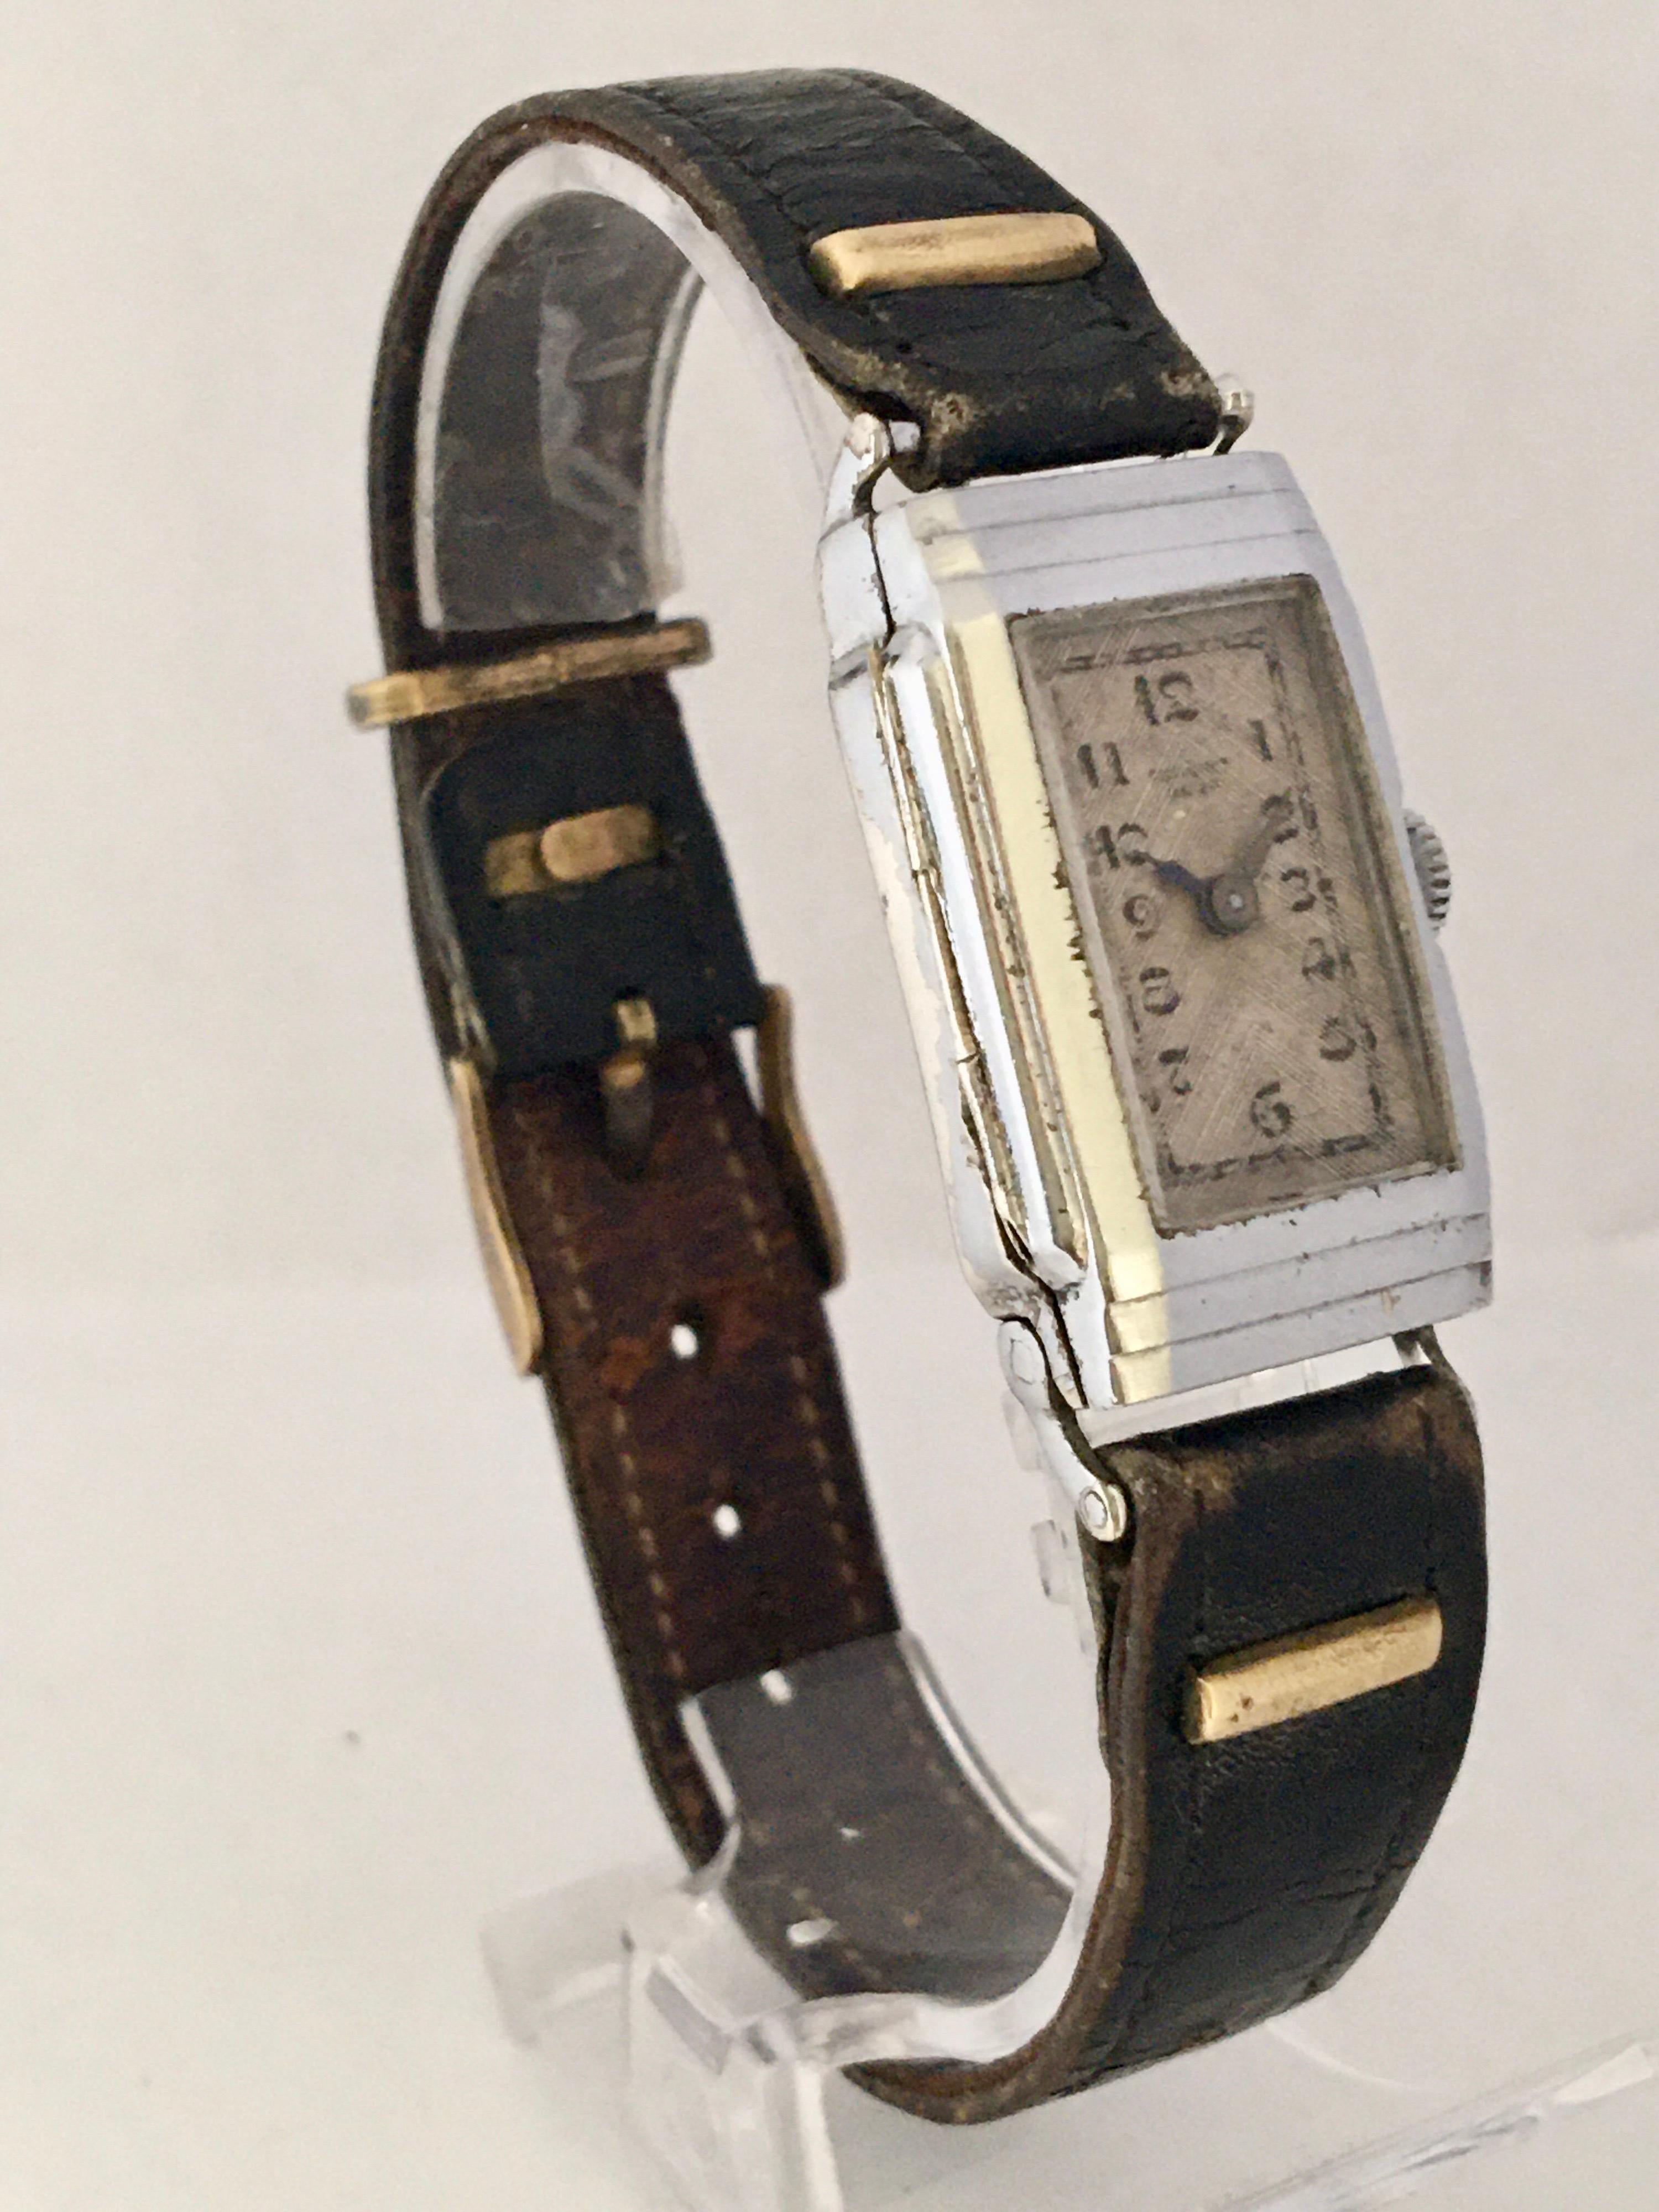 Rare Vintage 1930s Fortis Autorist Self Winding Watch by John Harwood For Sale 11